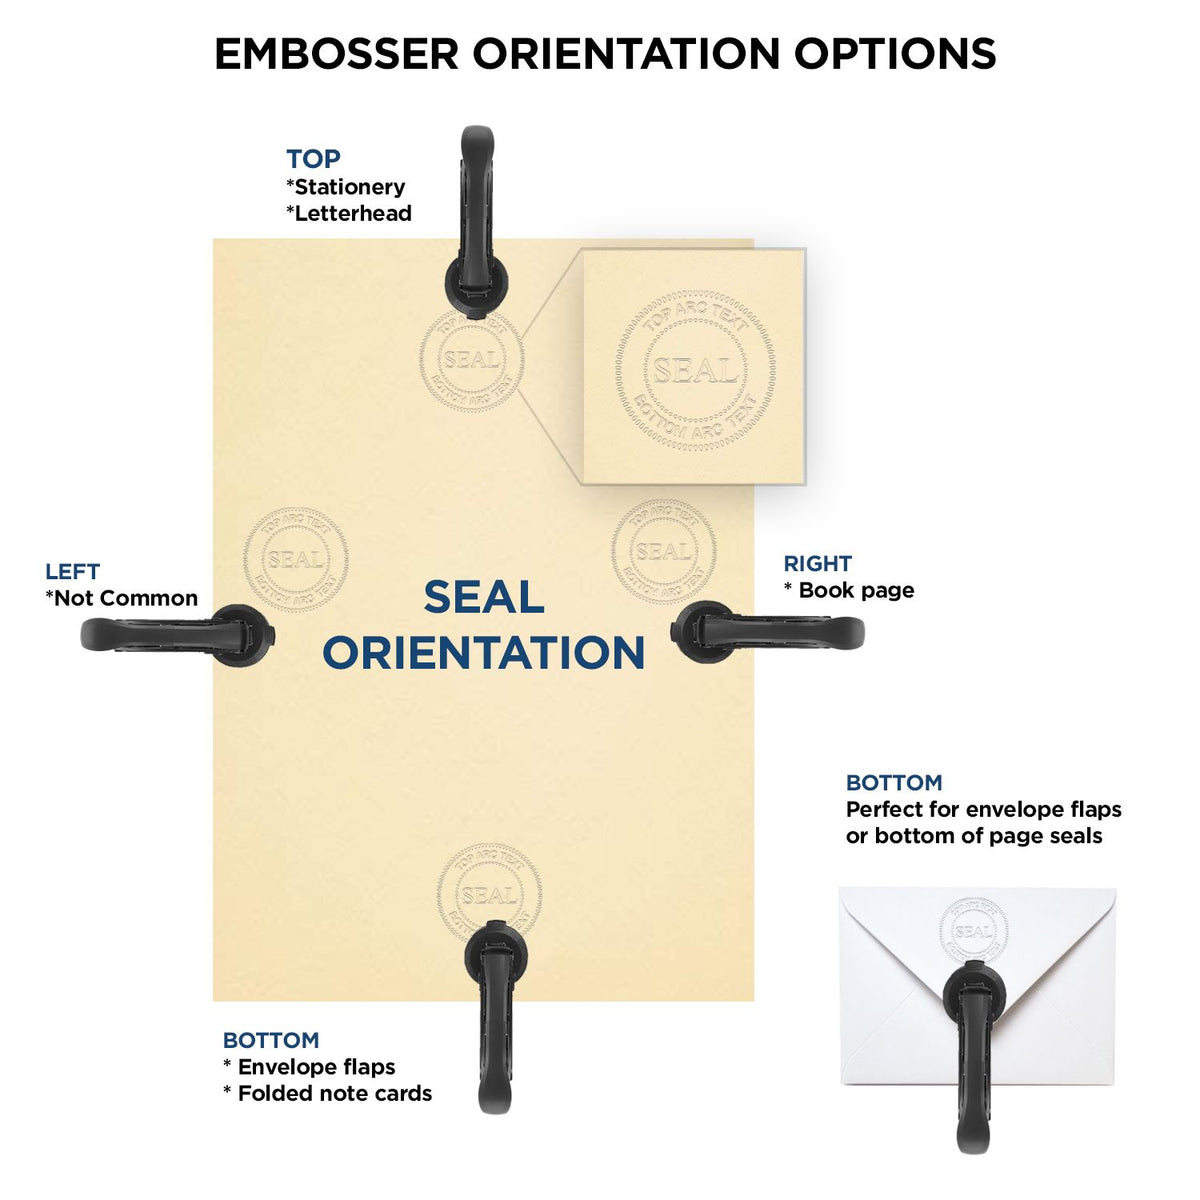 An infographic for the Florida Desk Architect Embossing Seal showing embosser orientation, this is showing examples of a top, bottom, right and left insert.